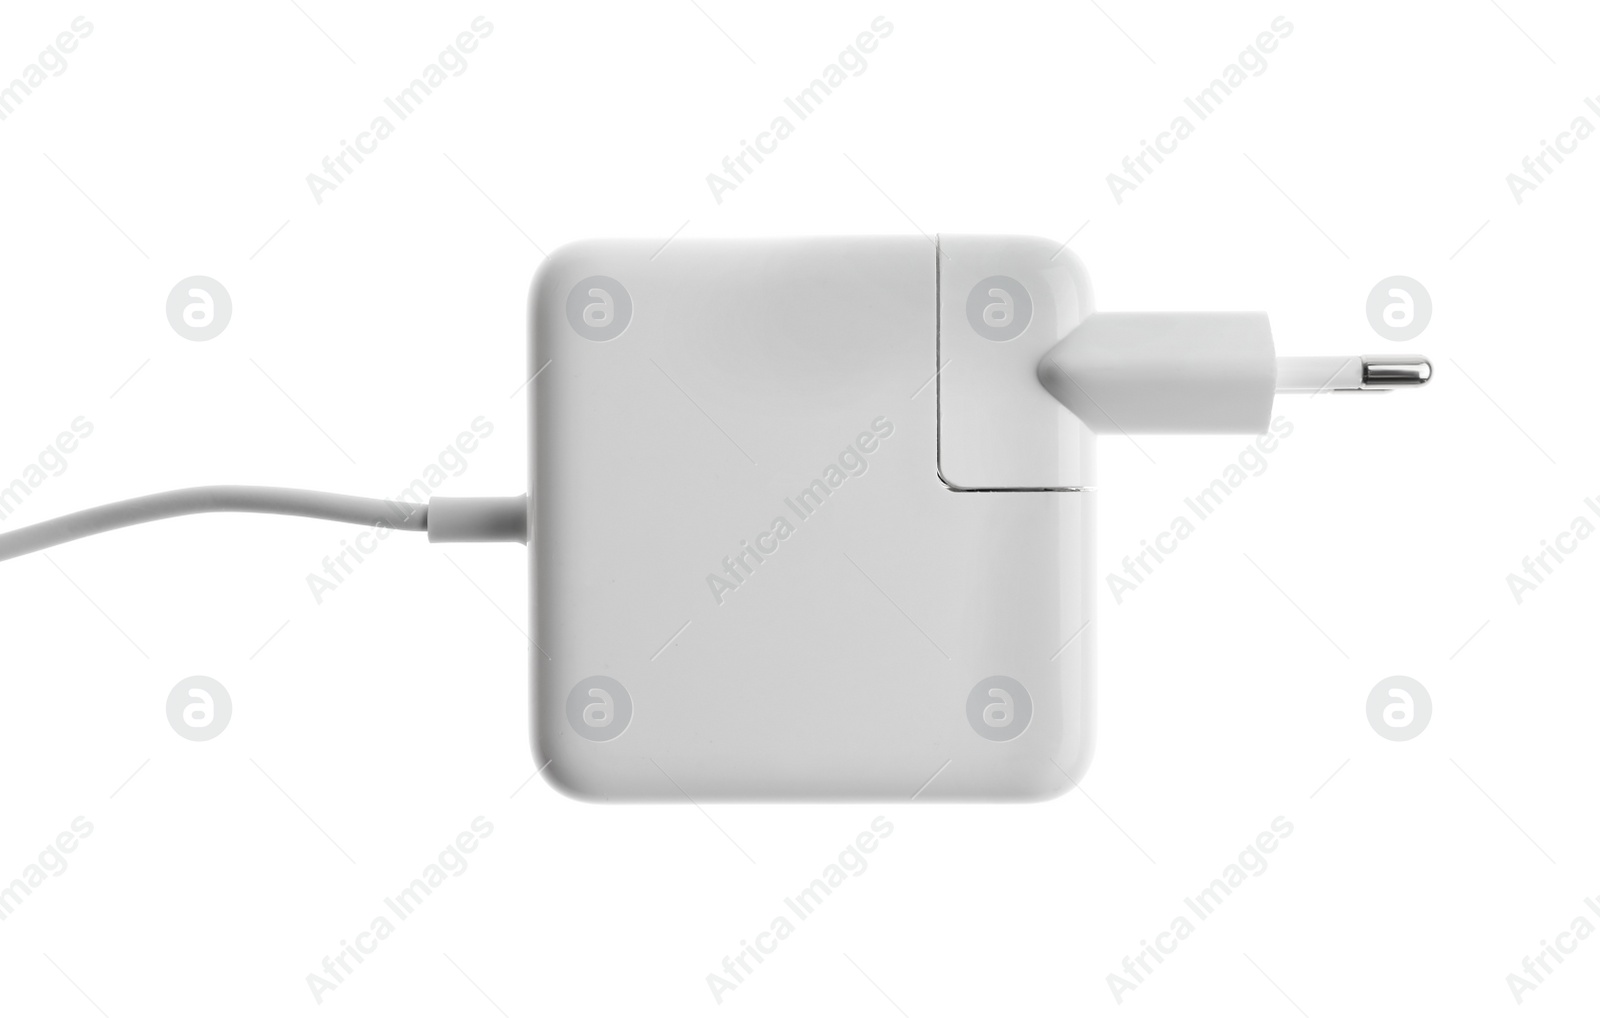 Photo of Power adapter for battery charging isolated on white, top view